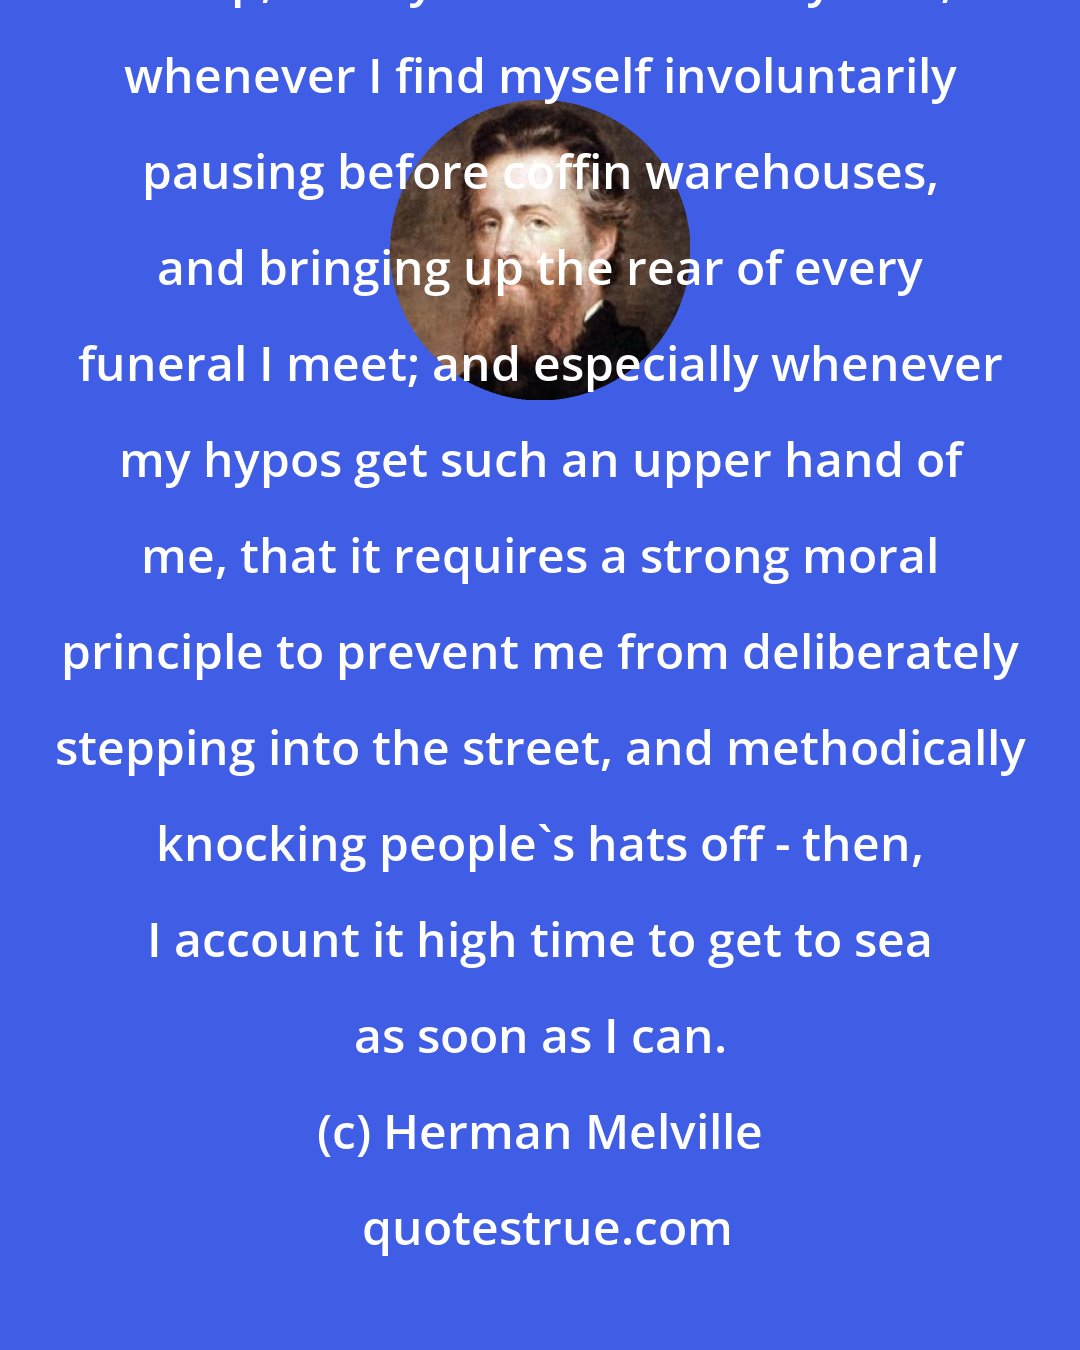 Herman Melville: Whenever I find myself growing grim about the mouth; whenever it is a damp, drizzly November in my soul; whenever I find myself involuntarily pausing before coffin warehouses, and bringing up the rear of every funeral I meet; and especially whenever my hypos get such an upper hand of me, that it requires a strong moral principle to prevent me from deliberately stepping into the street, and methodically knocking people's hats off - then, I account it high time to get to sea as soon as I can.